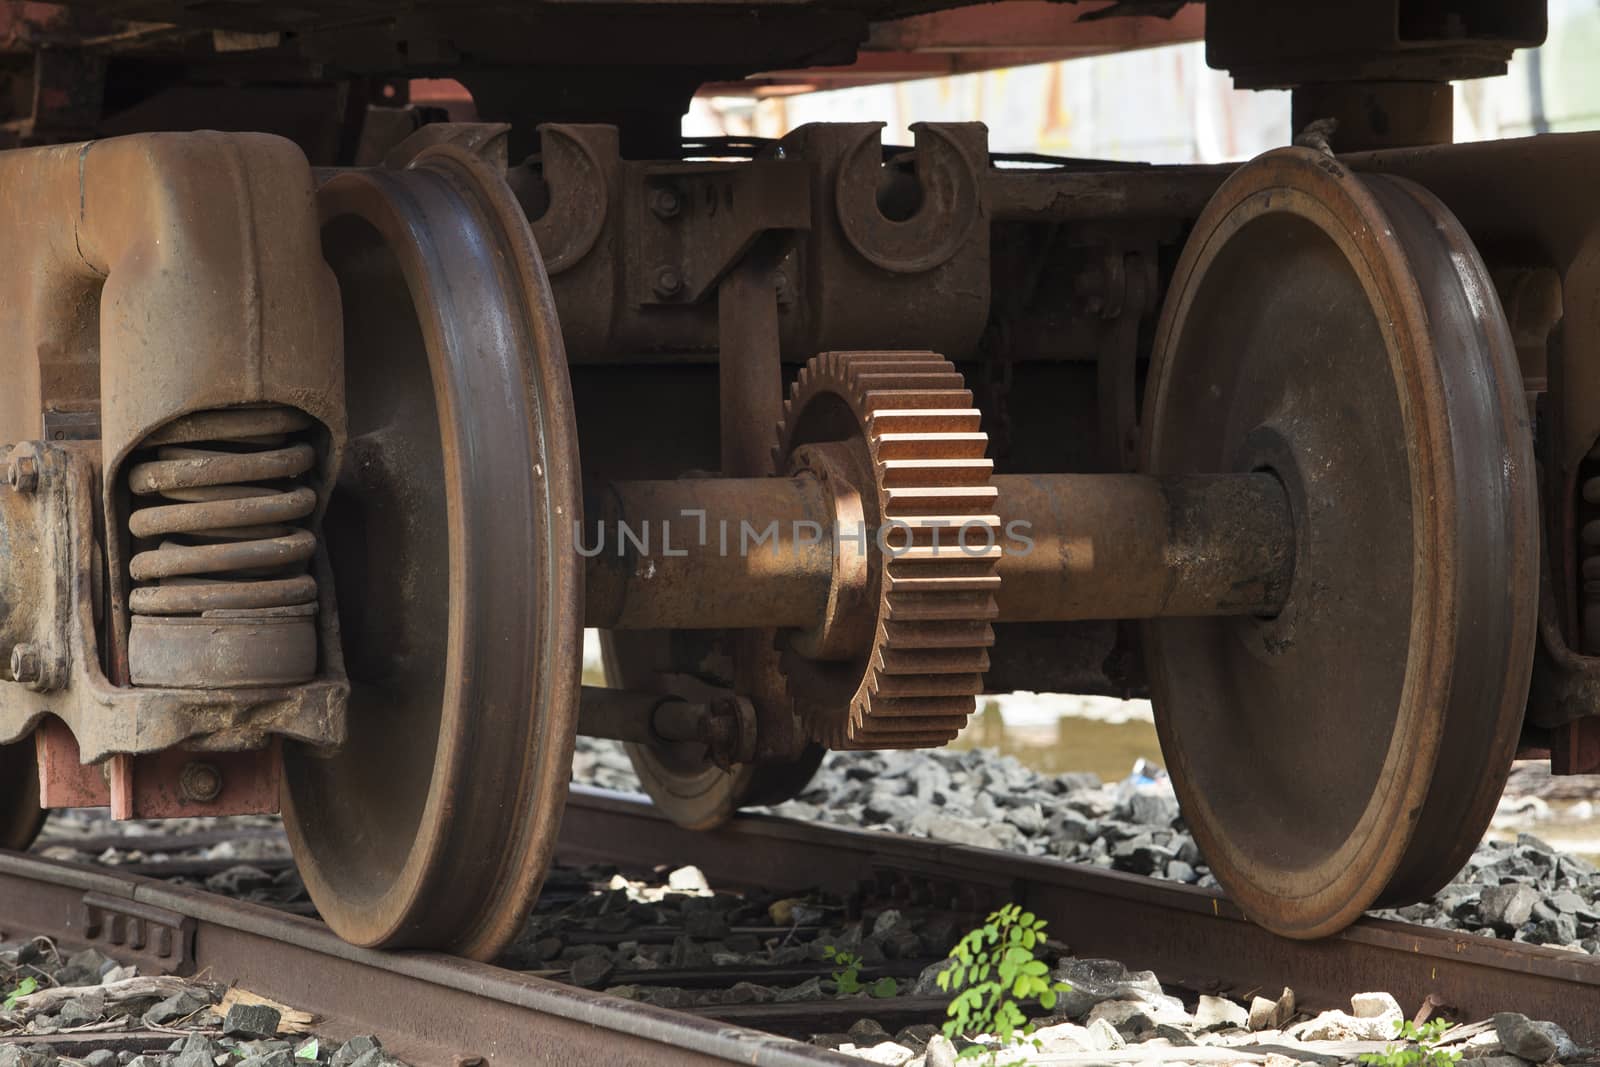 train wheels from metal during the movement of the train